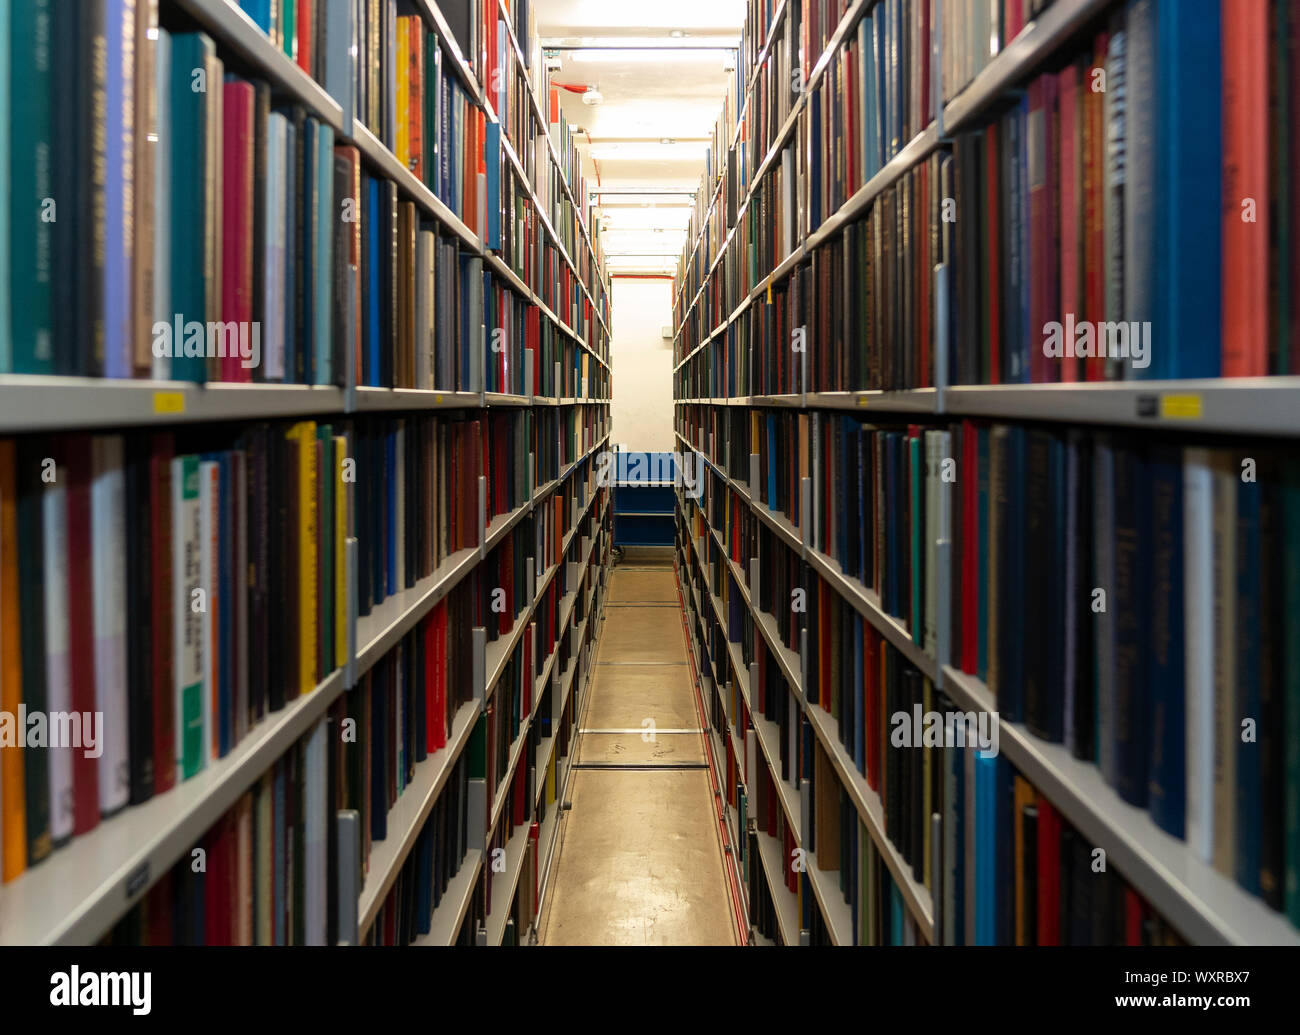 Interior of book storage floor of the National Library of Scotland in Edinburgh. Stock Photo